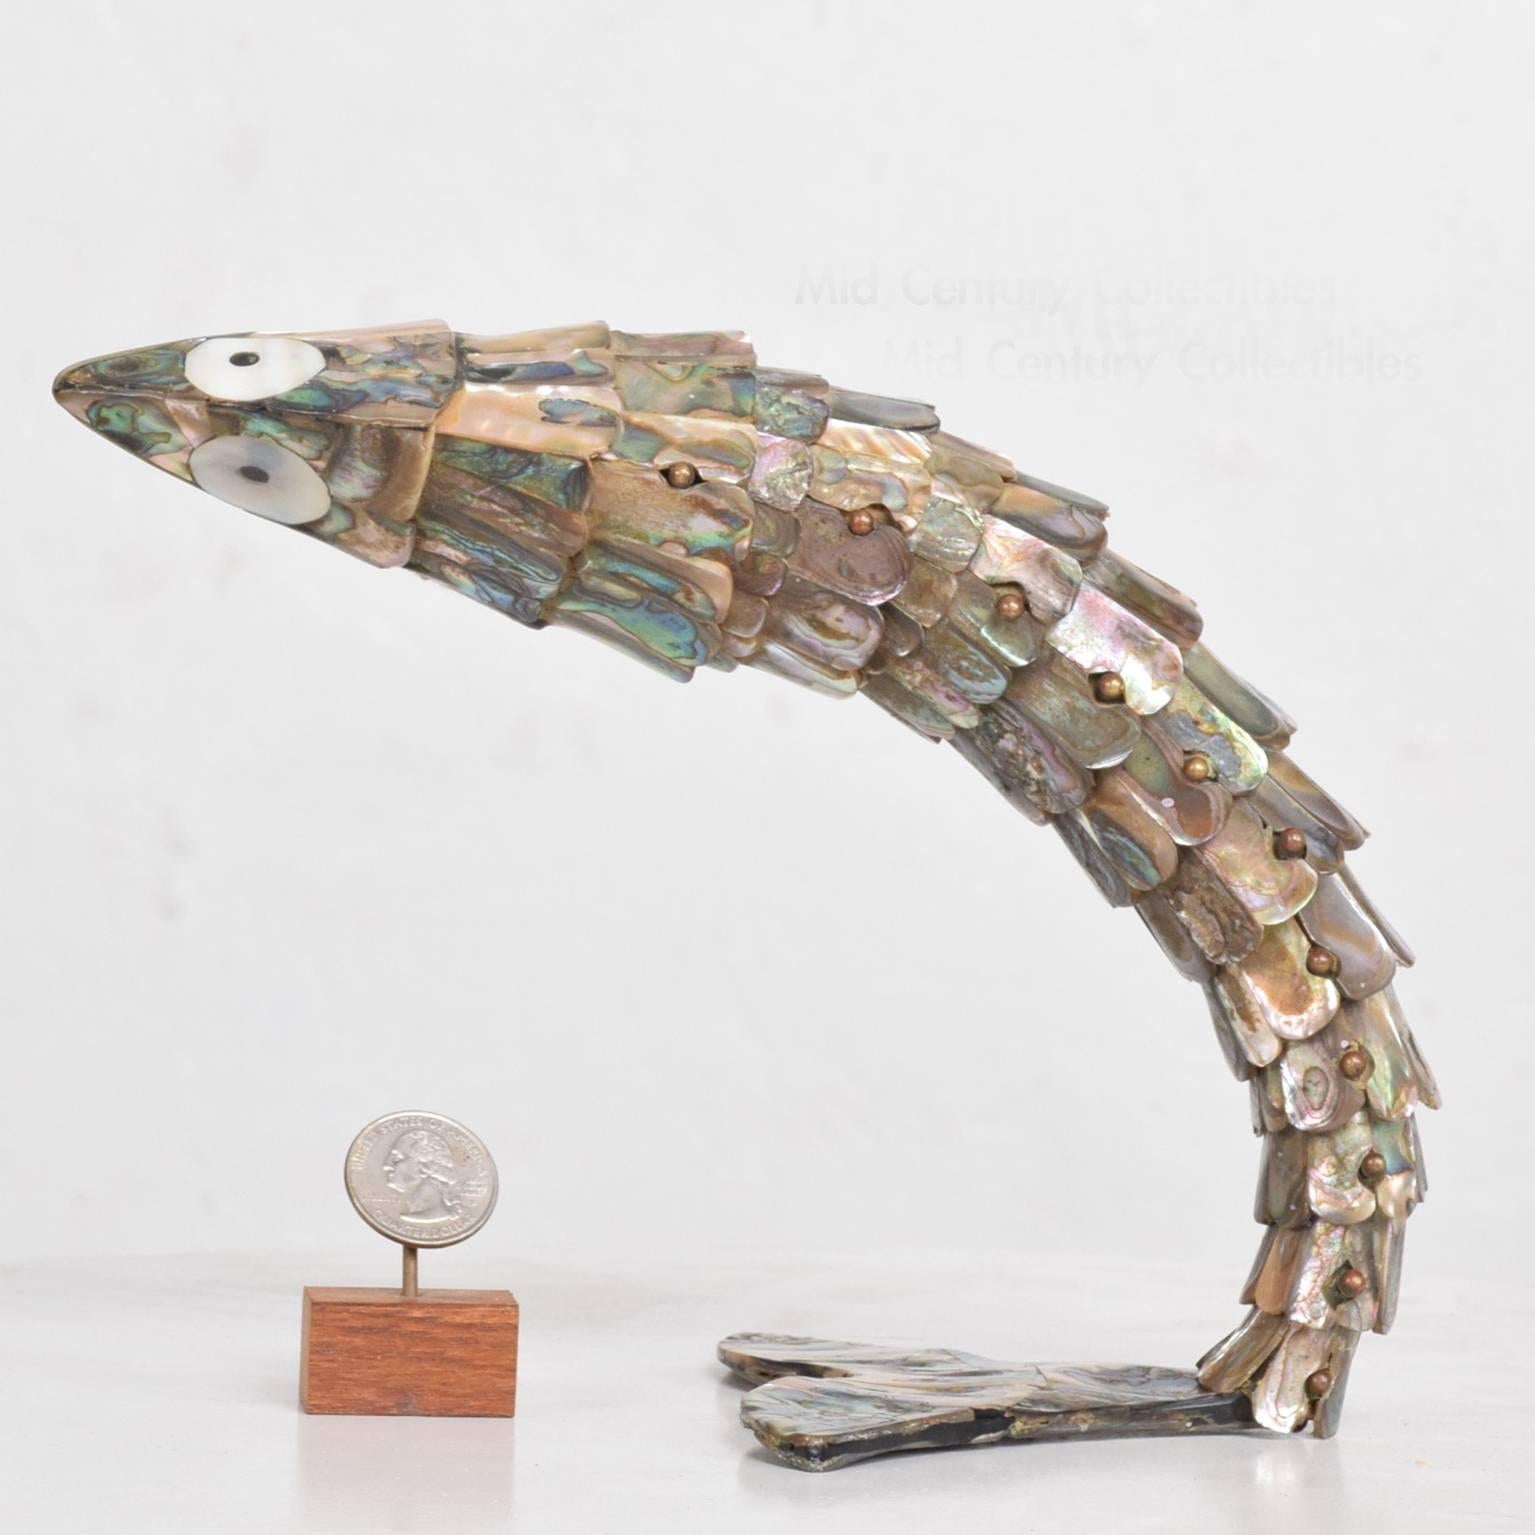 Mid-Century Modern 1960s Oversized Mexican Articulated Fish Bottle Opener